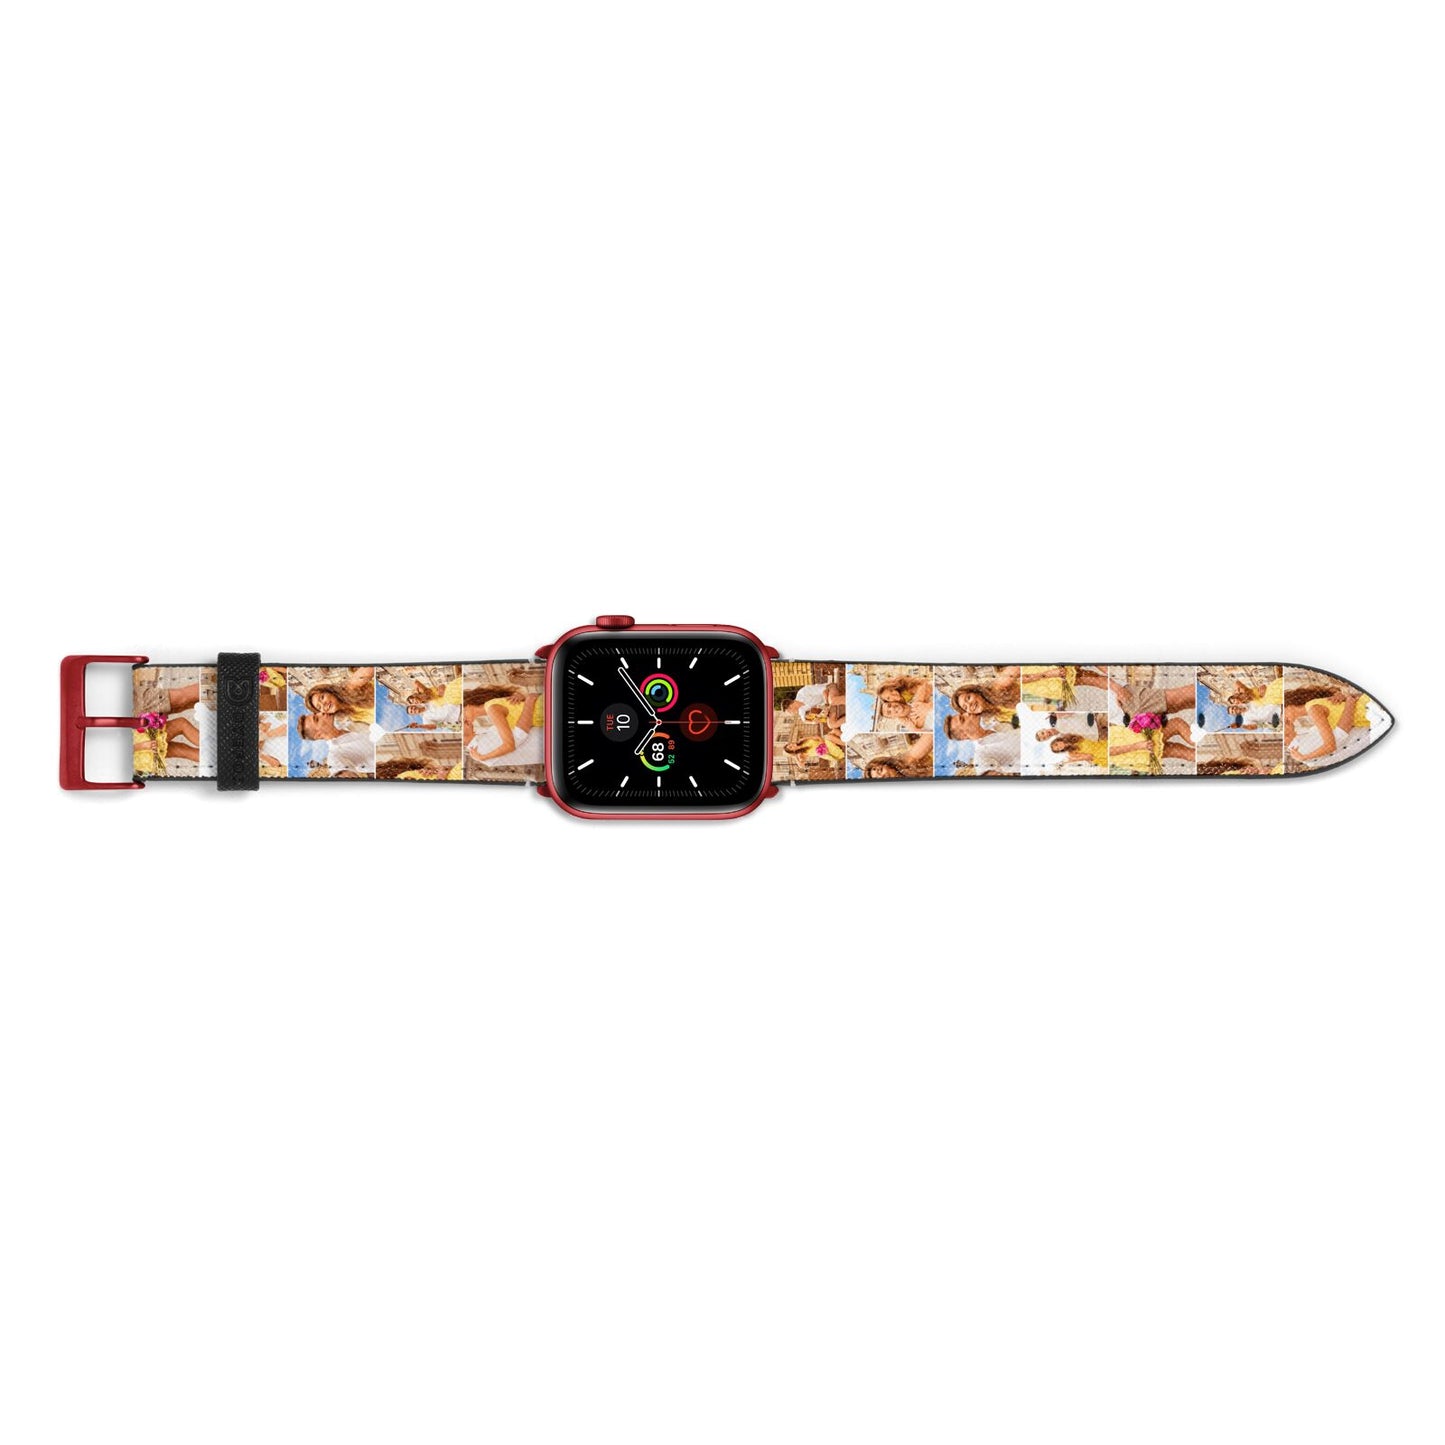 Photo Collage Heart Apple Watch Strap Landscape Image Red Hardware